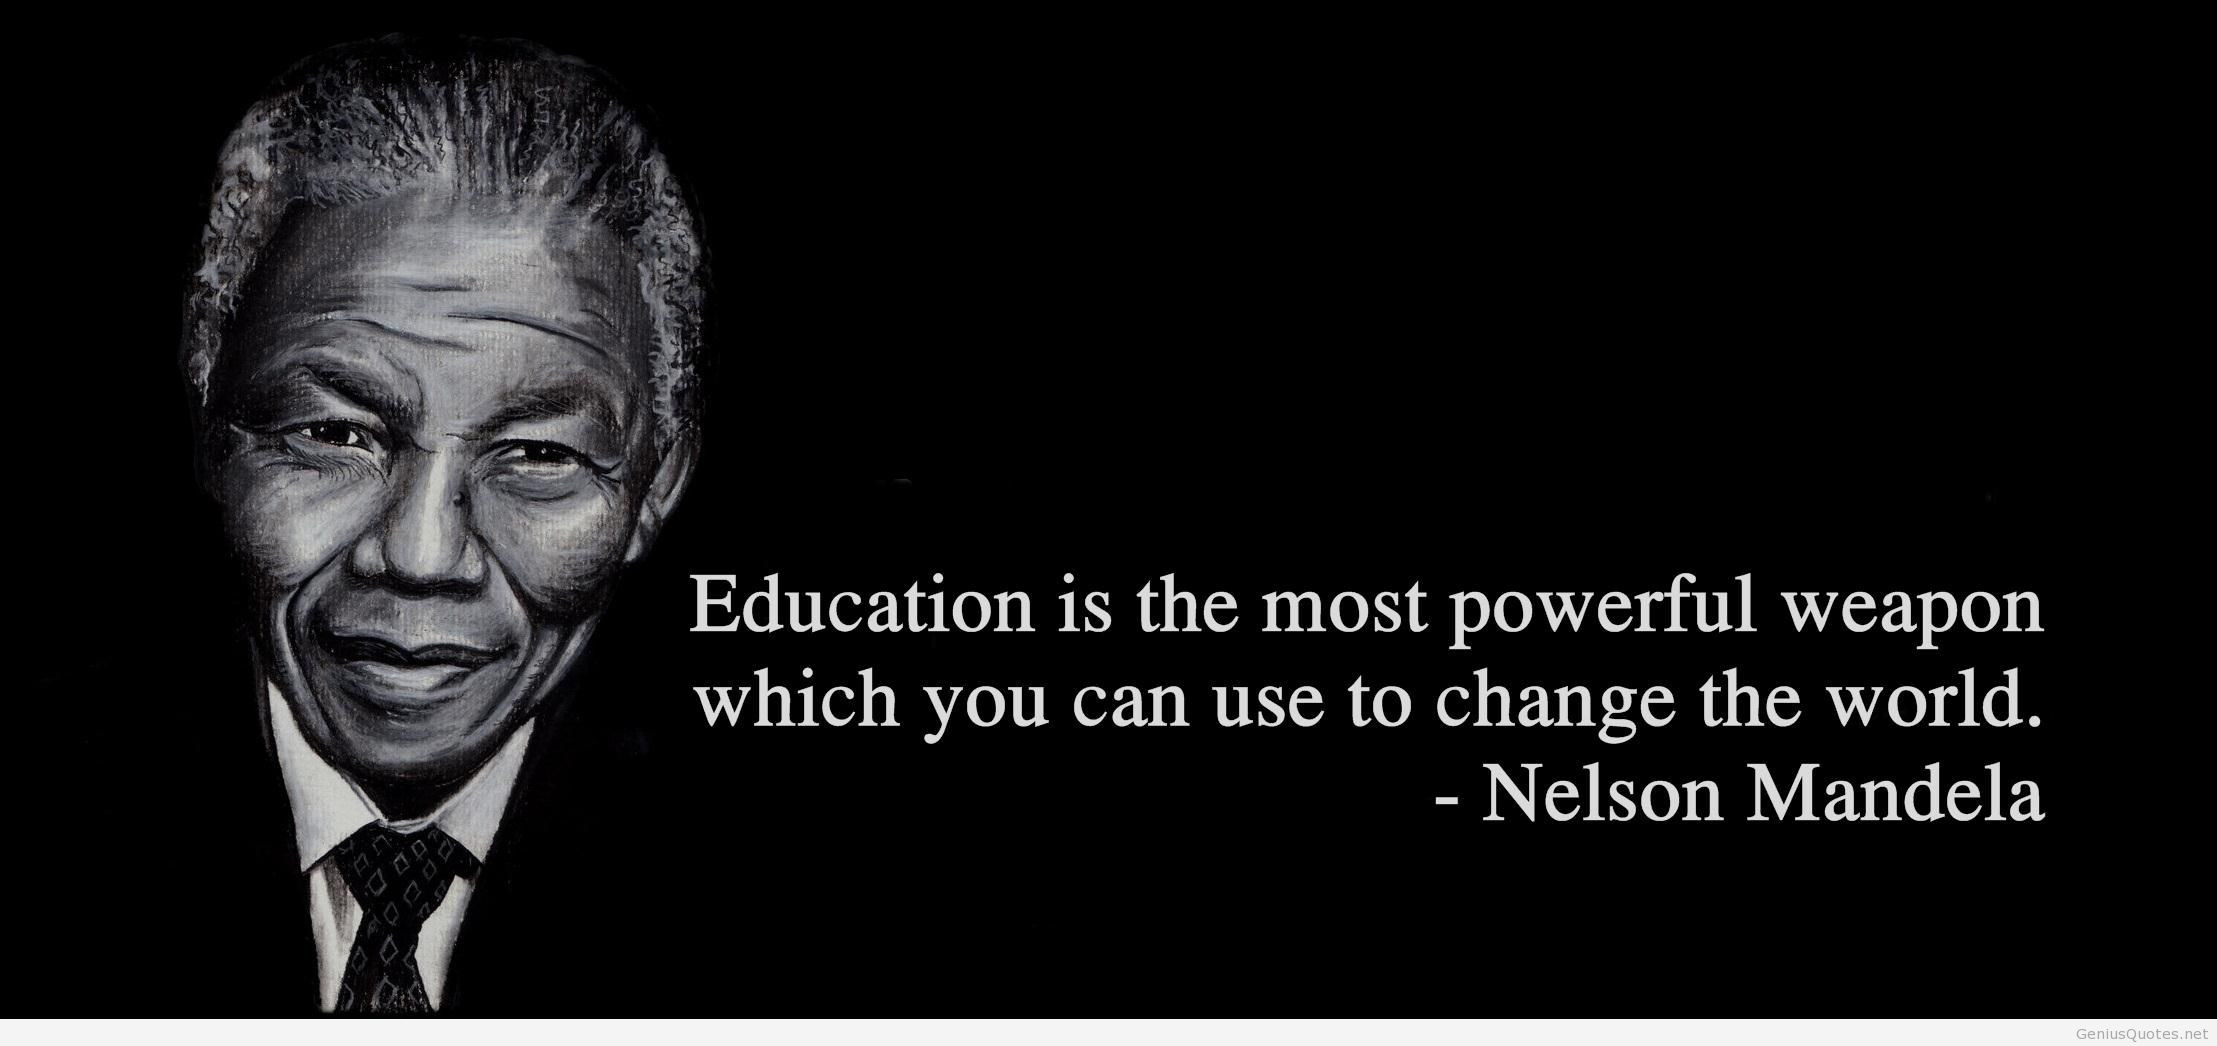 Famous Quotes About Education
 education quotes wallpaper